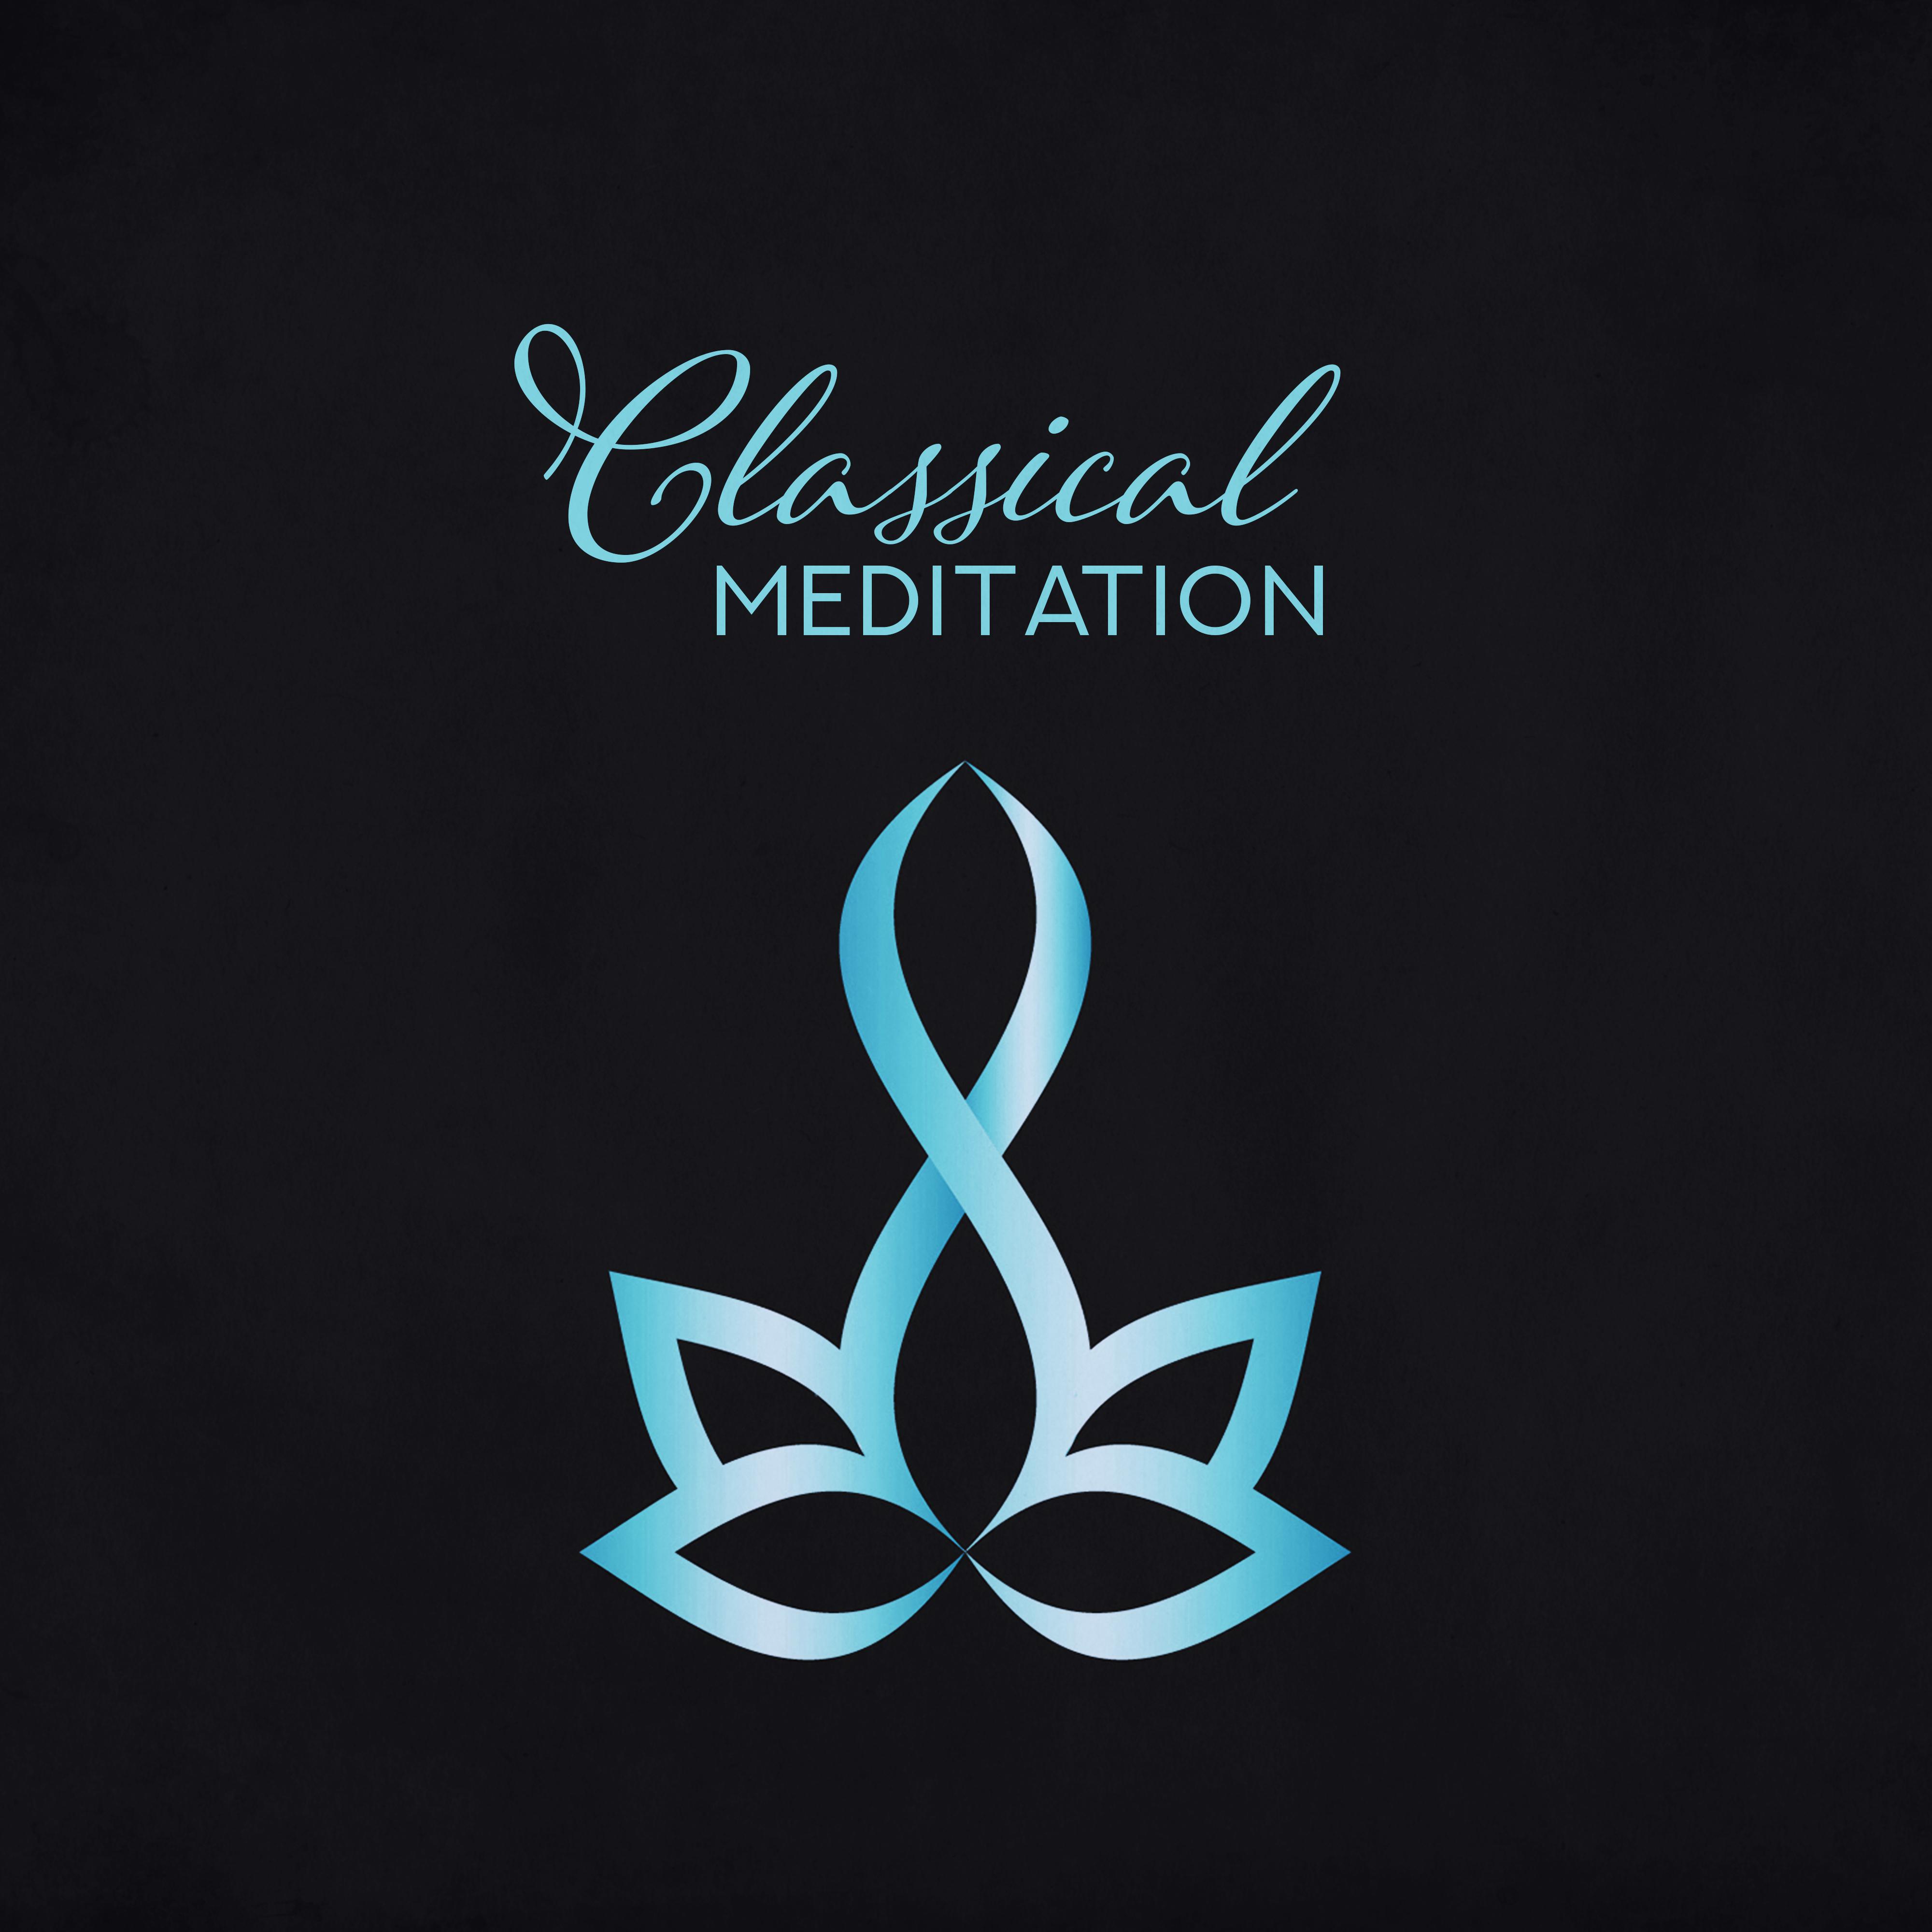 Classical Meditation – Gentle Meditation Music, Peaceful Melodies for Relaxation, Ambient Yoga, Harmony Meditation Melodies